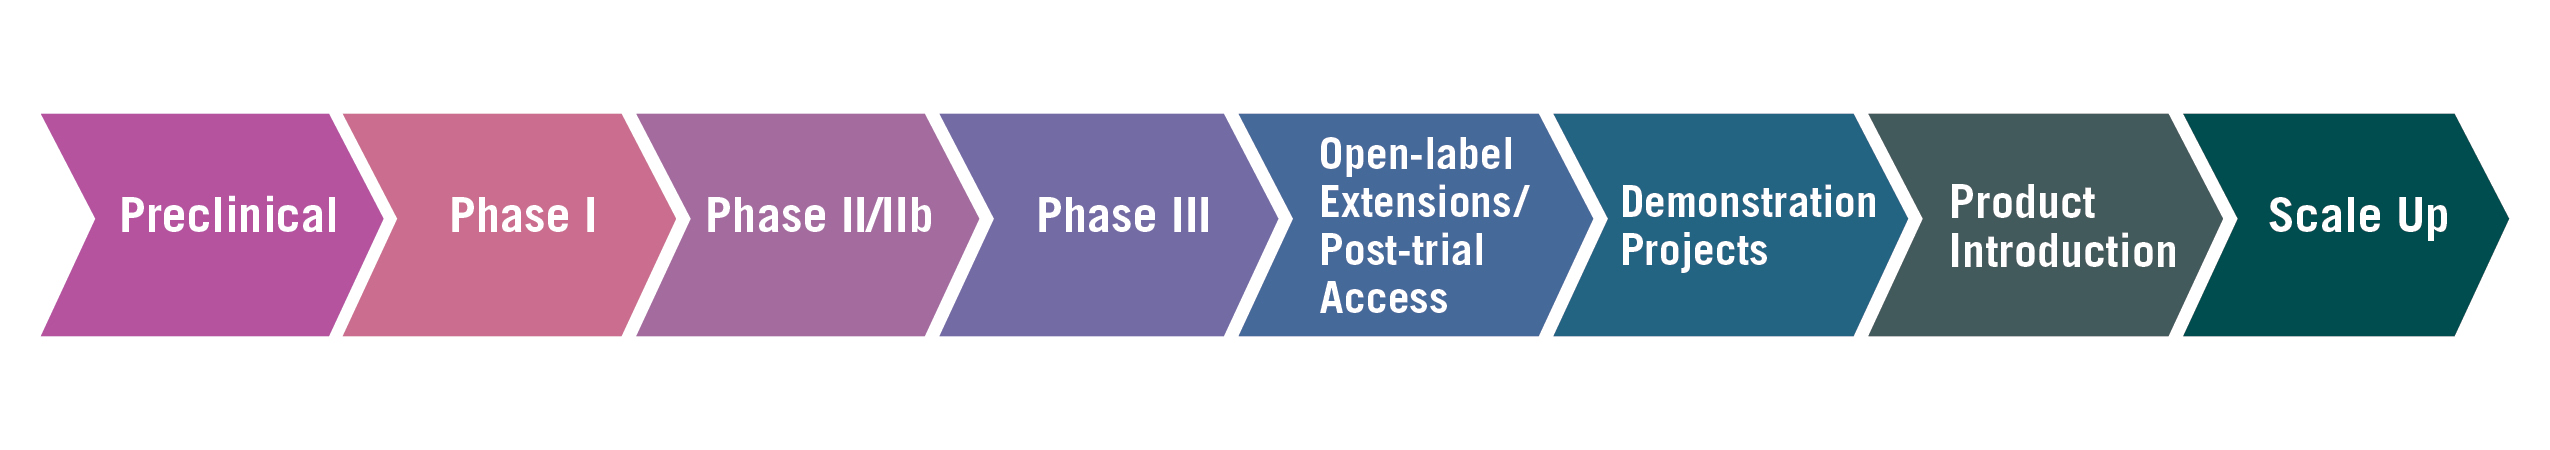 phases in trial development